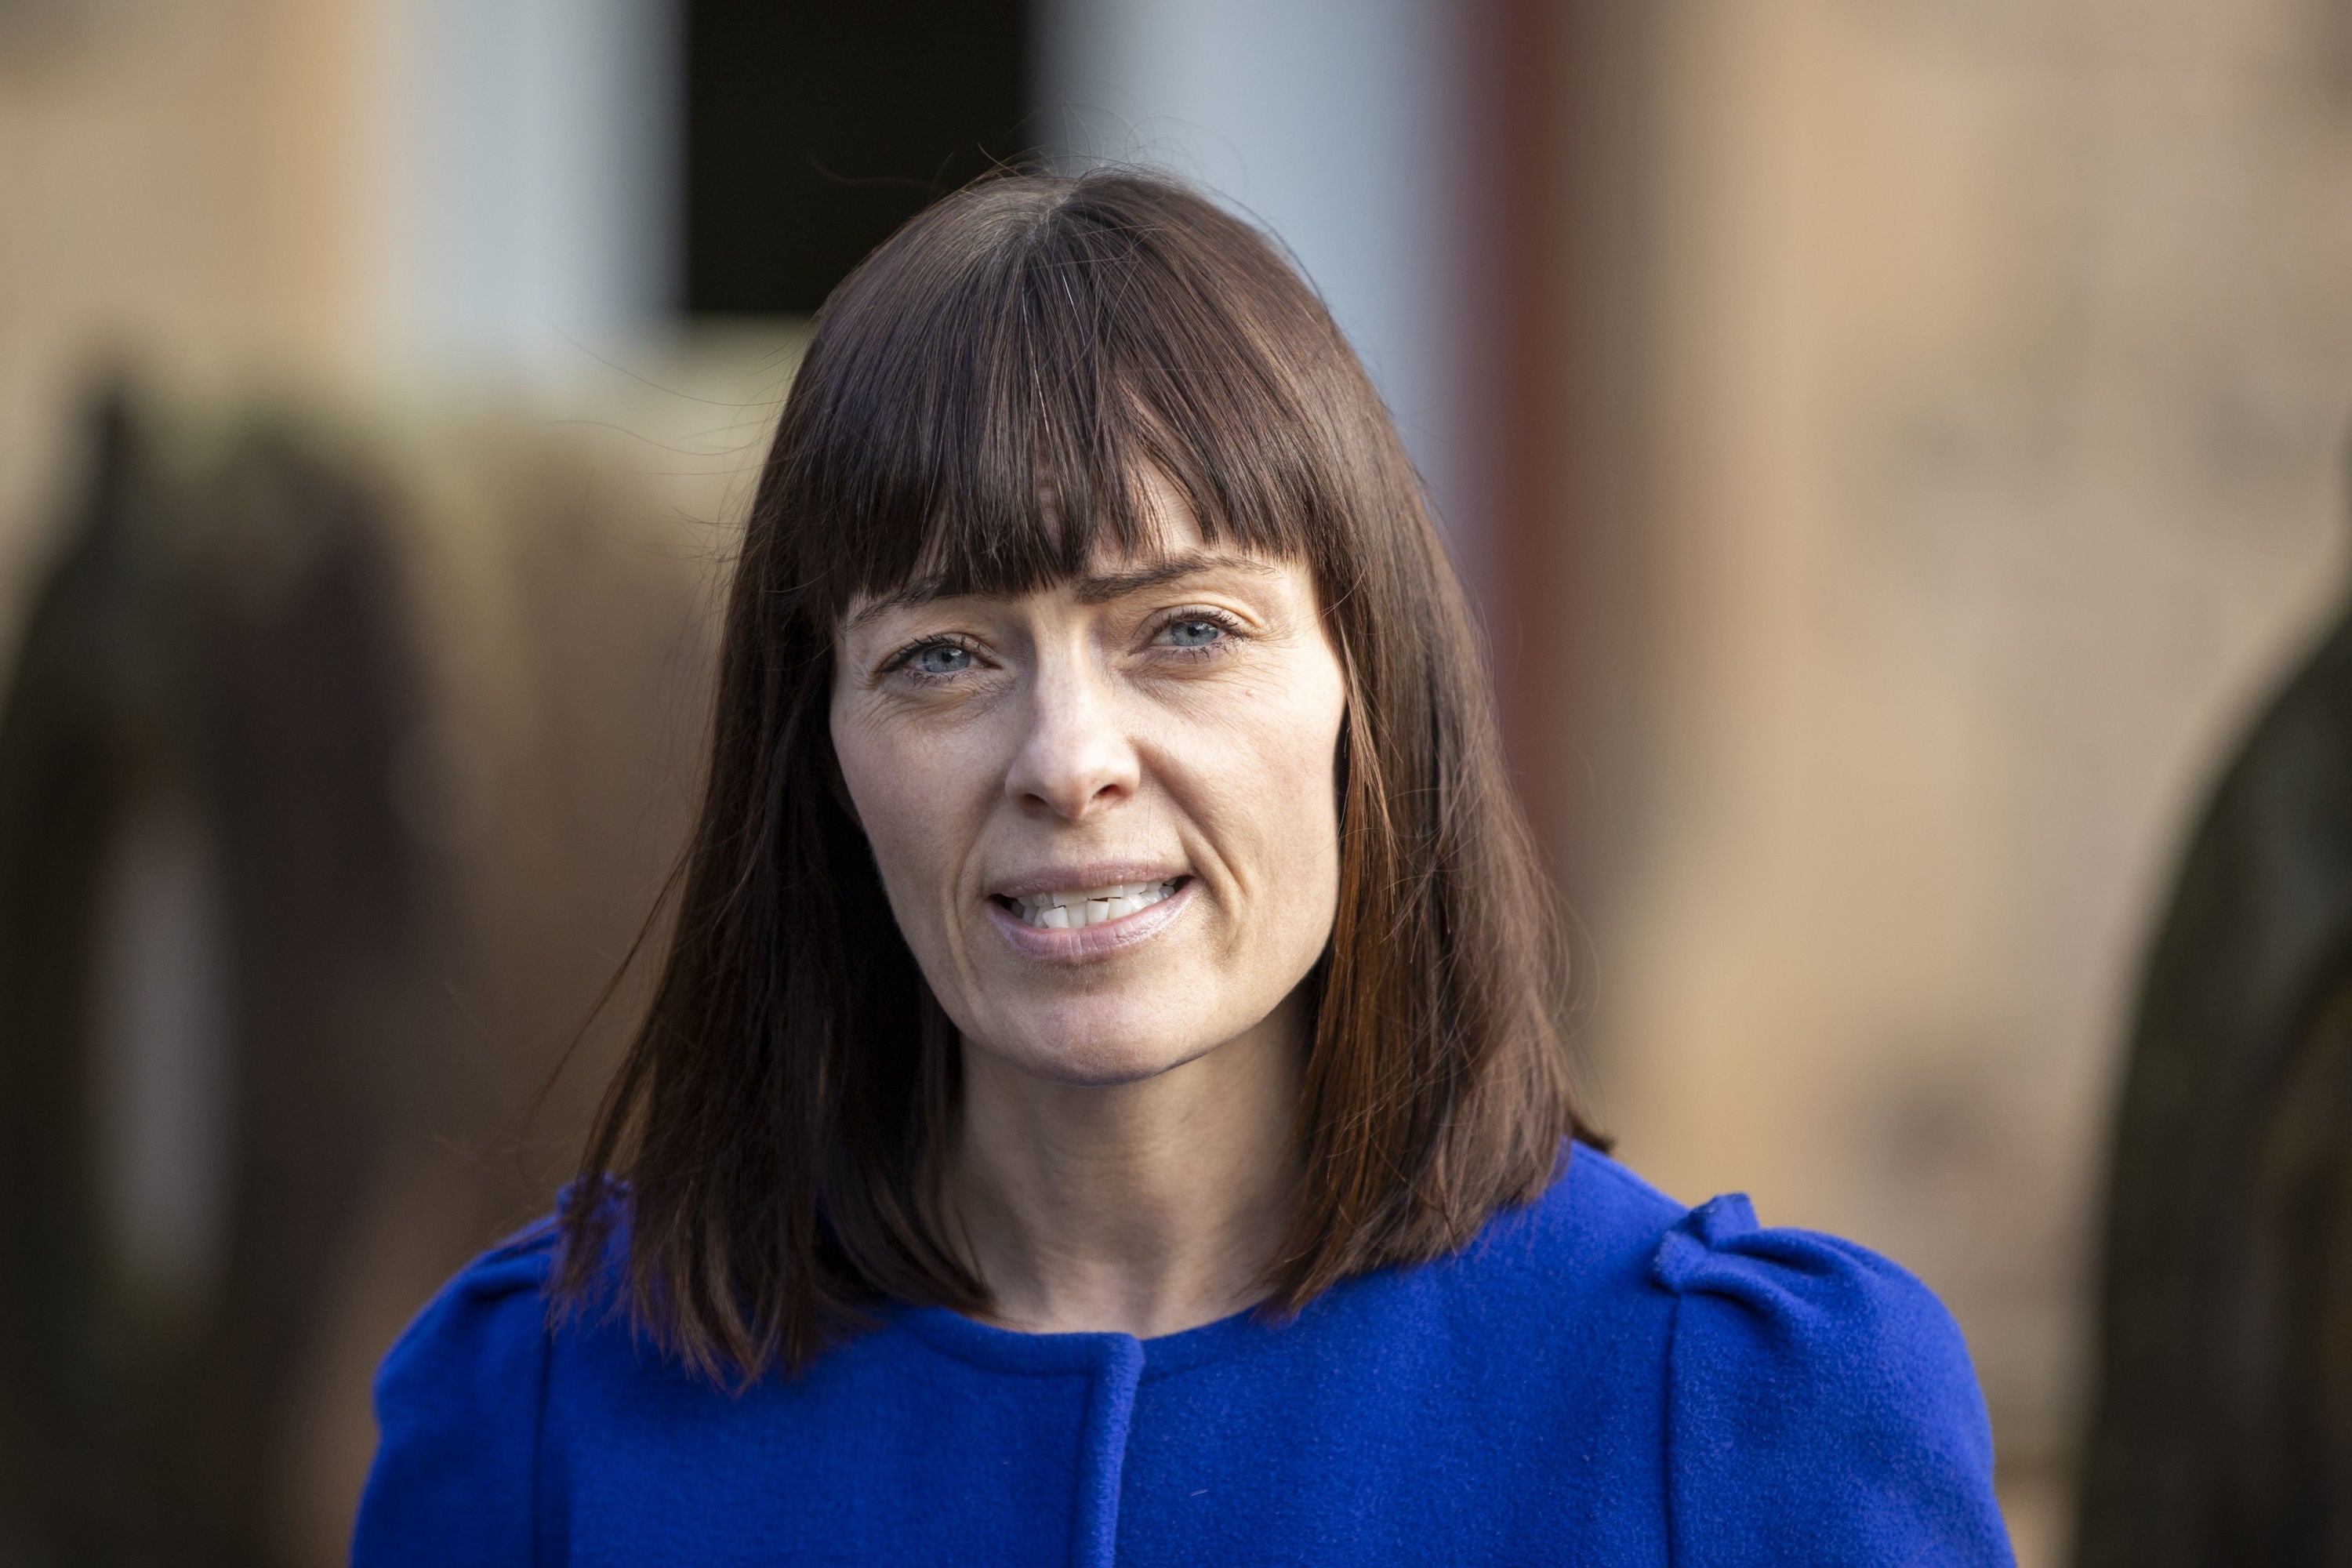 Infrastructure Minister Nichola Mallon said parties needed to focus on getting outstanding legislation through the Assembly before the election (Liam McBurney/PA)